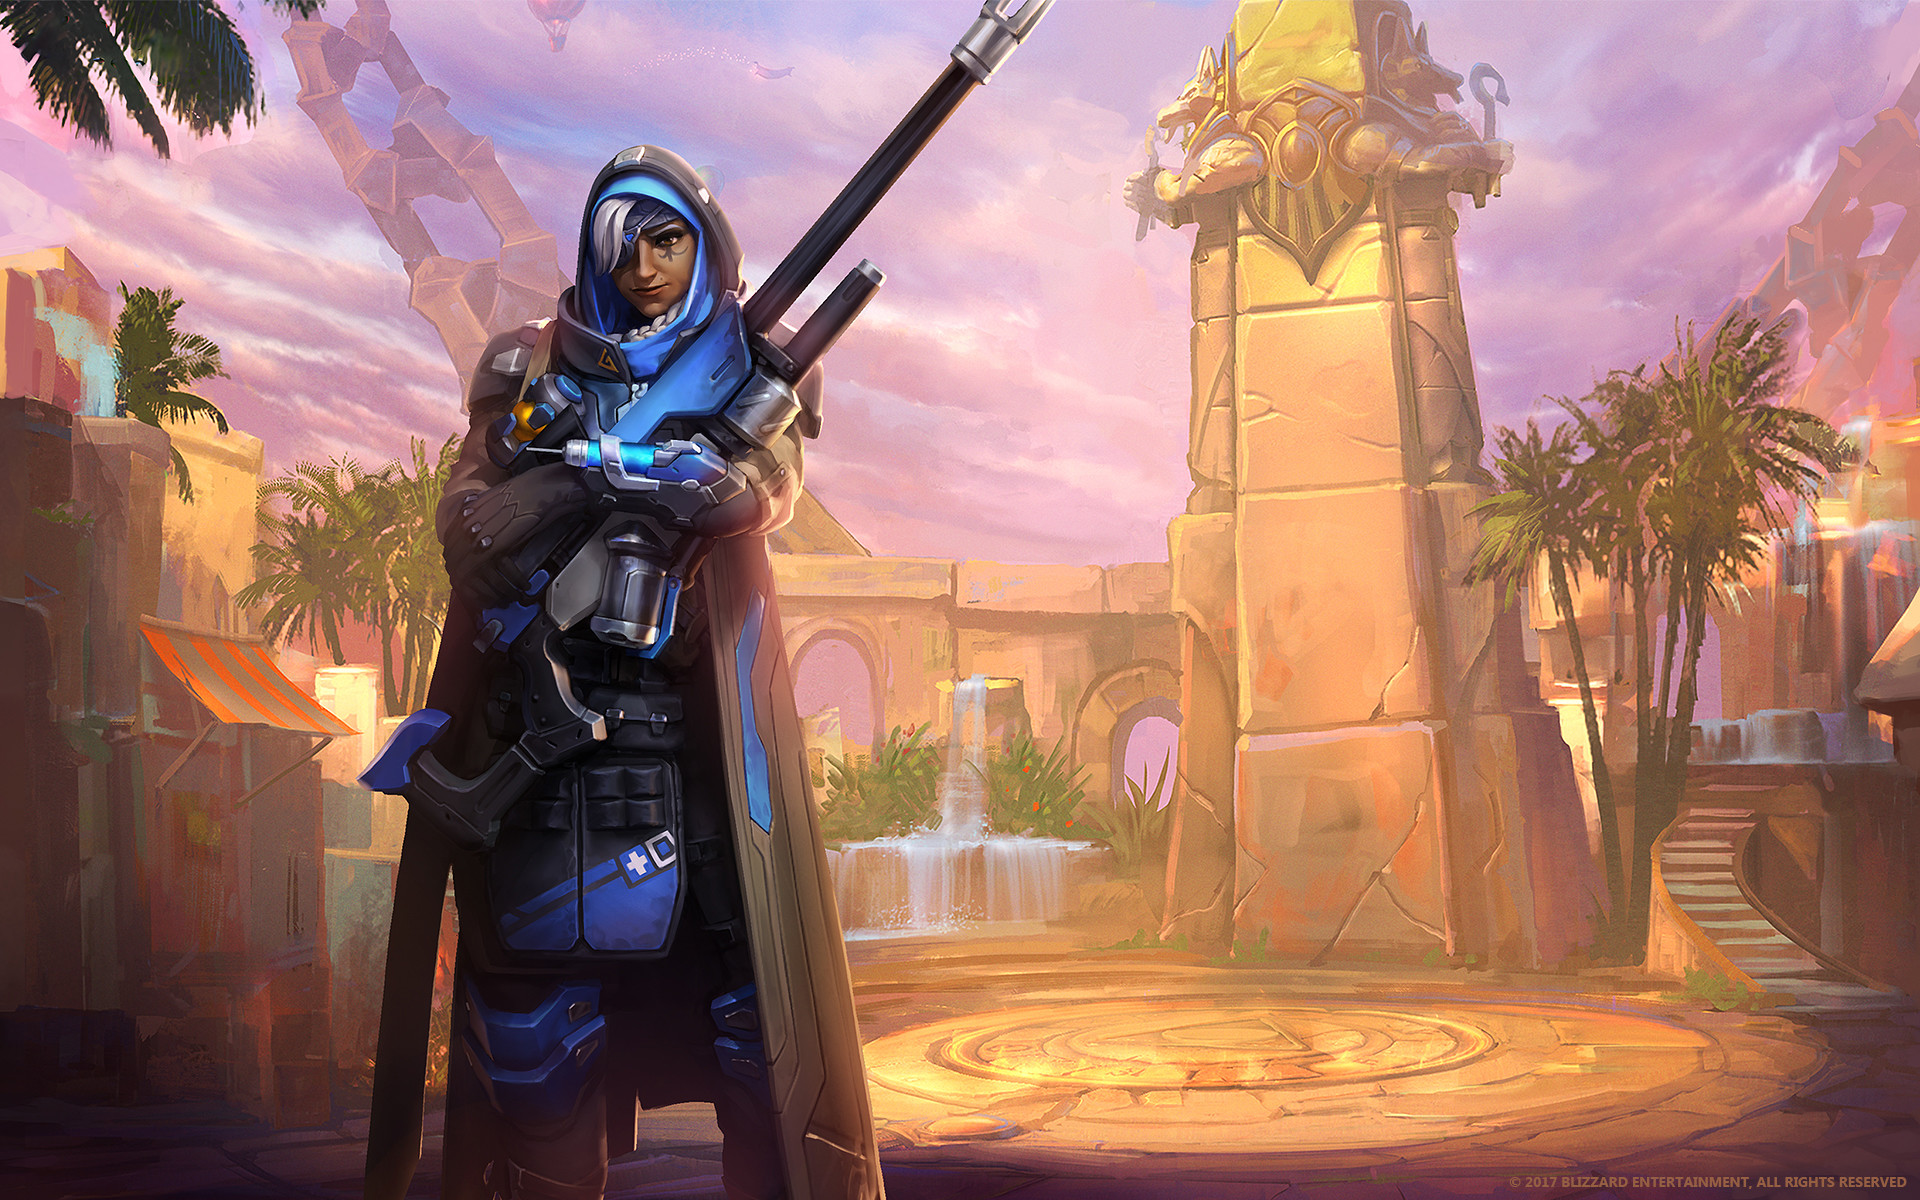 Desktop Wallpaper Ana Overwatch Sniper Online Game Hd Image Picture Background 02014a